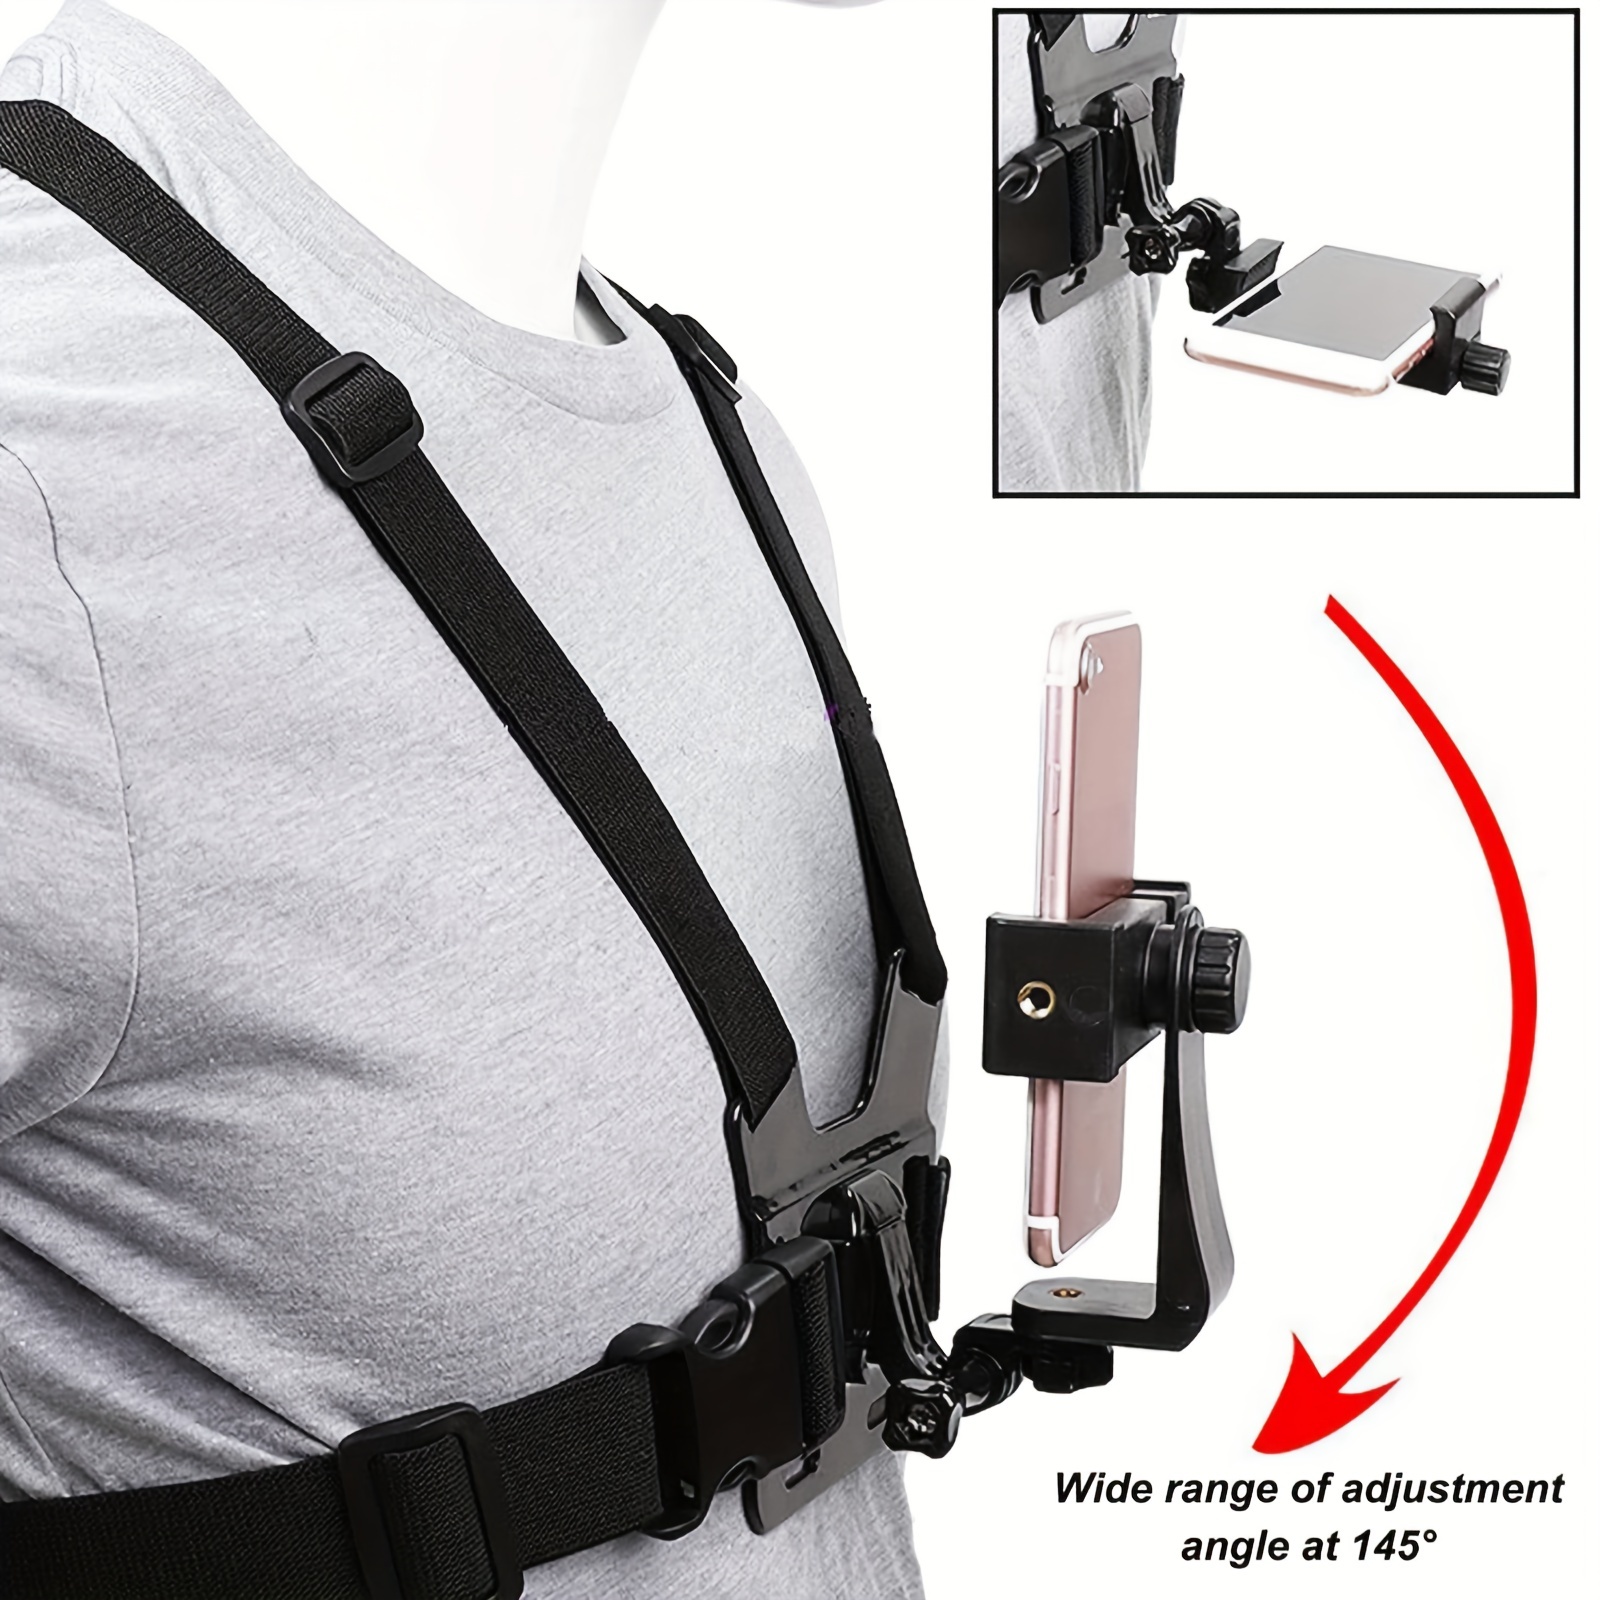 Mobile Phone Chest Strap Mount,Harness Strap Holder Universal